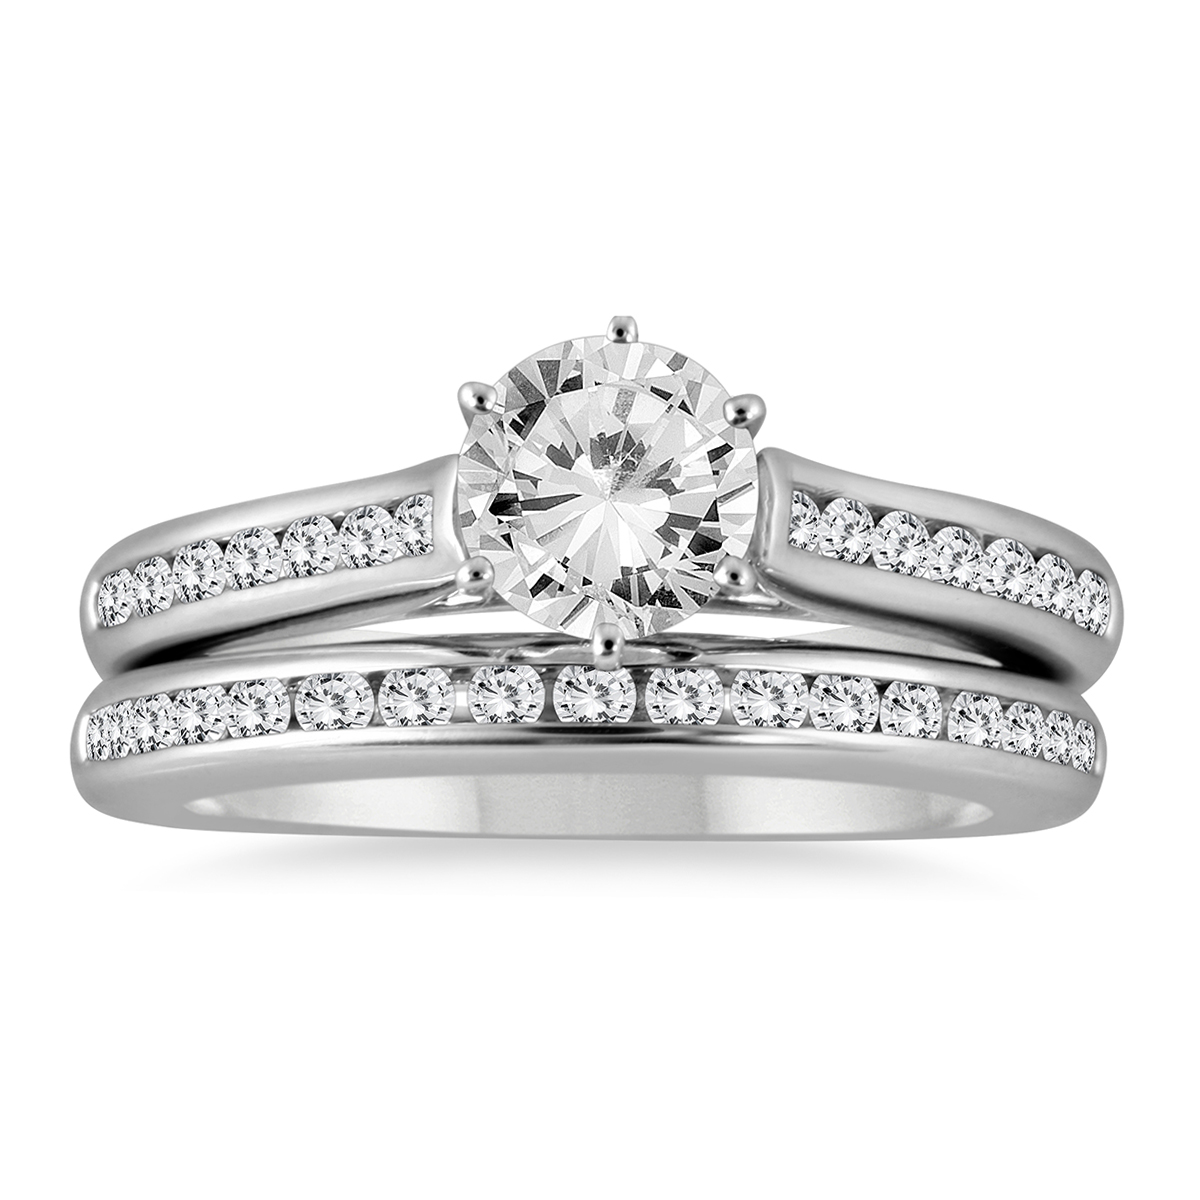 Image of AGS Certified 1 5/8 Carat TW Diamond Bridal Set in 14K White Gold (J-K Color I2-I3 Clarity)